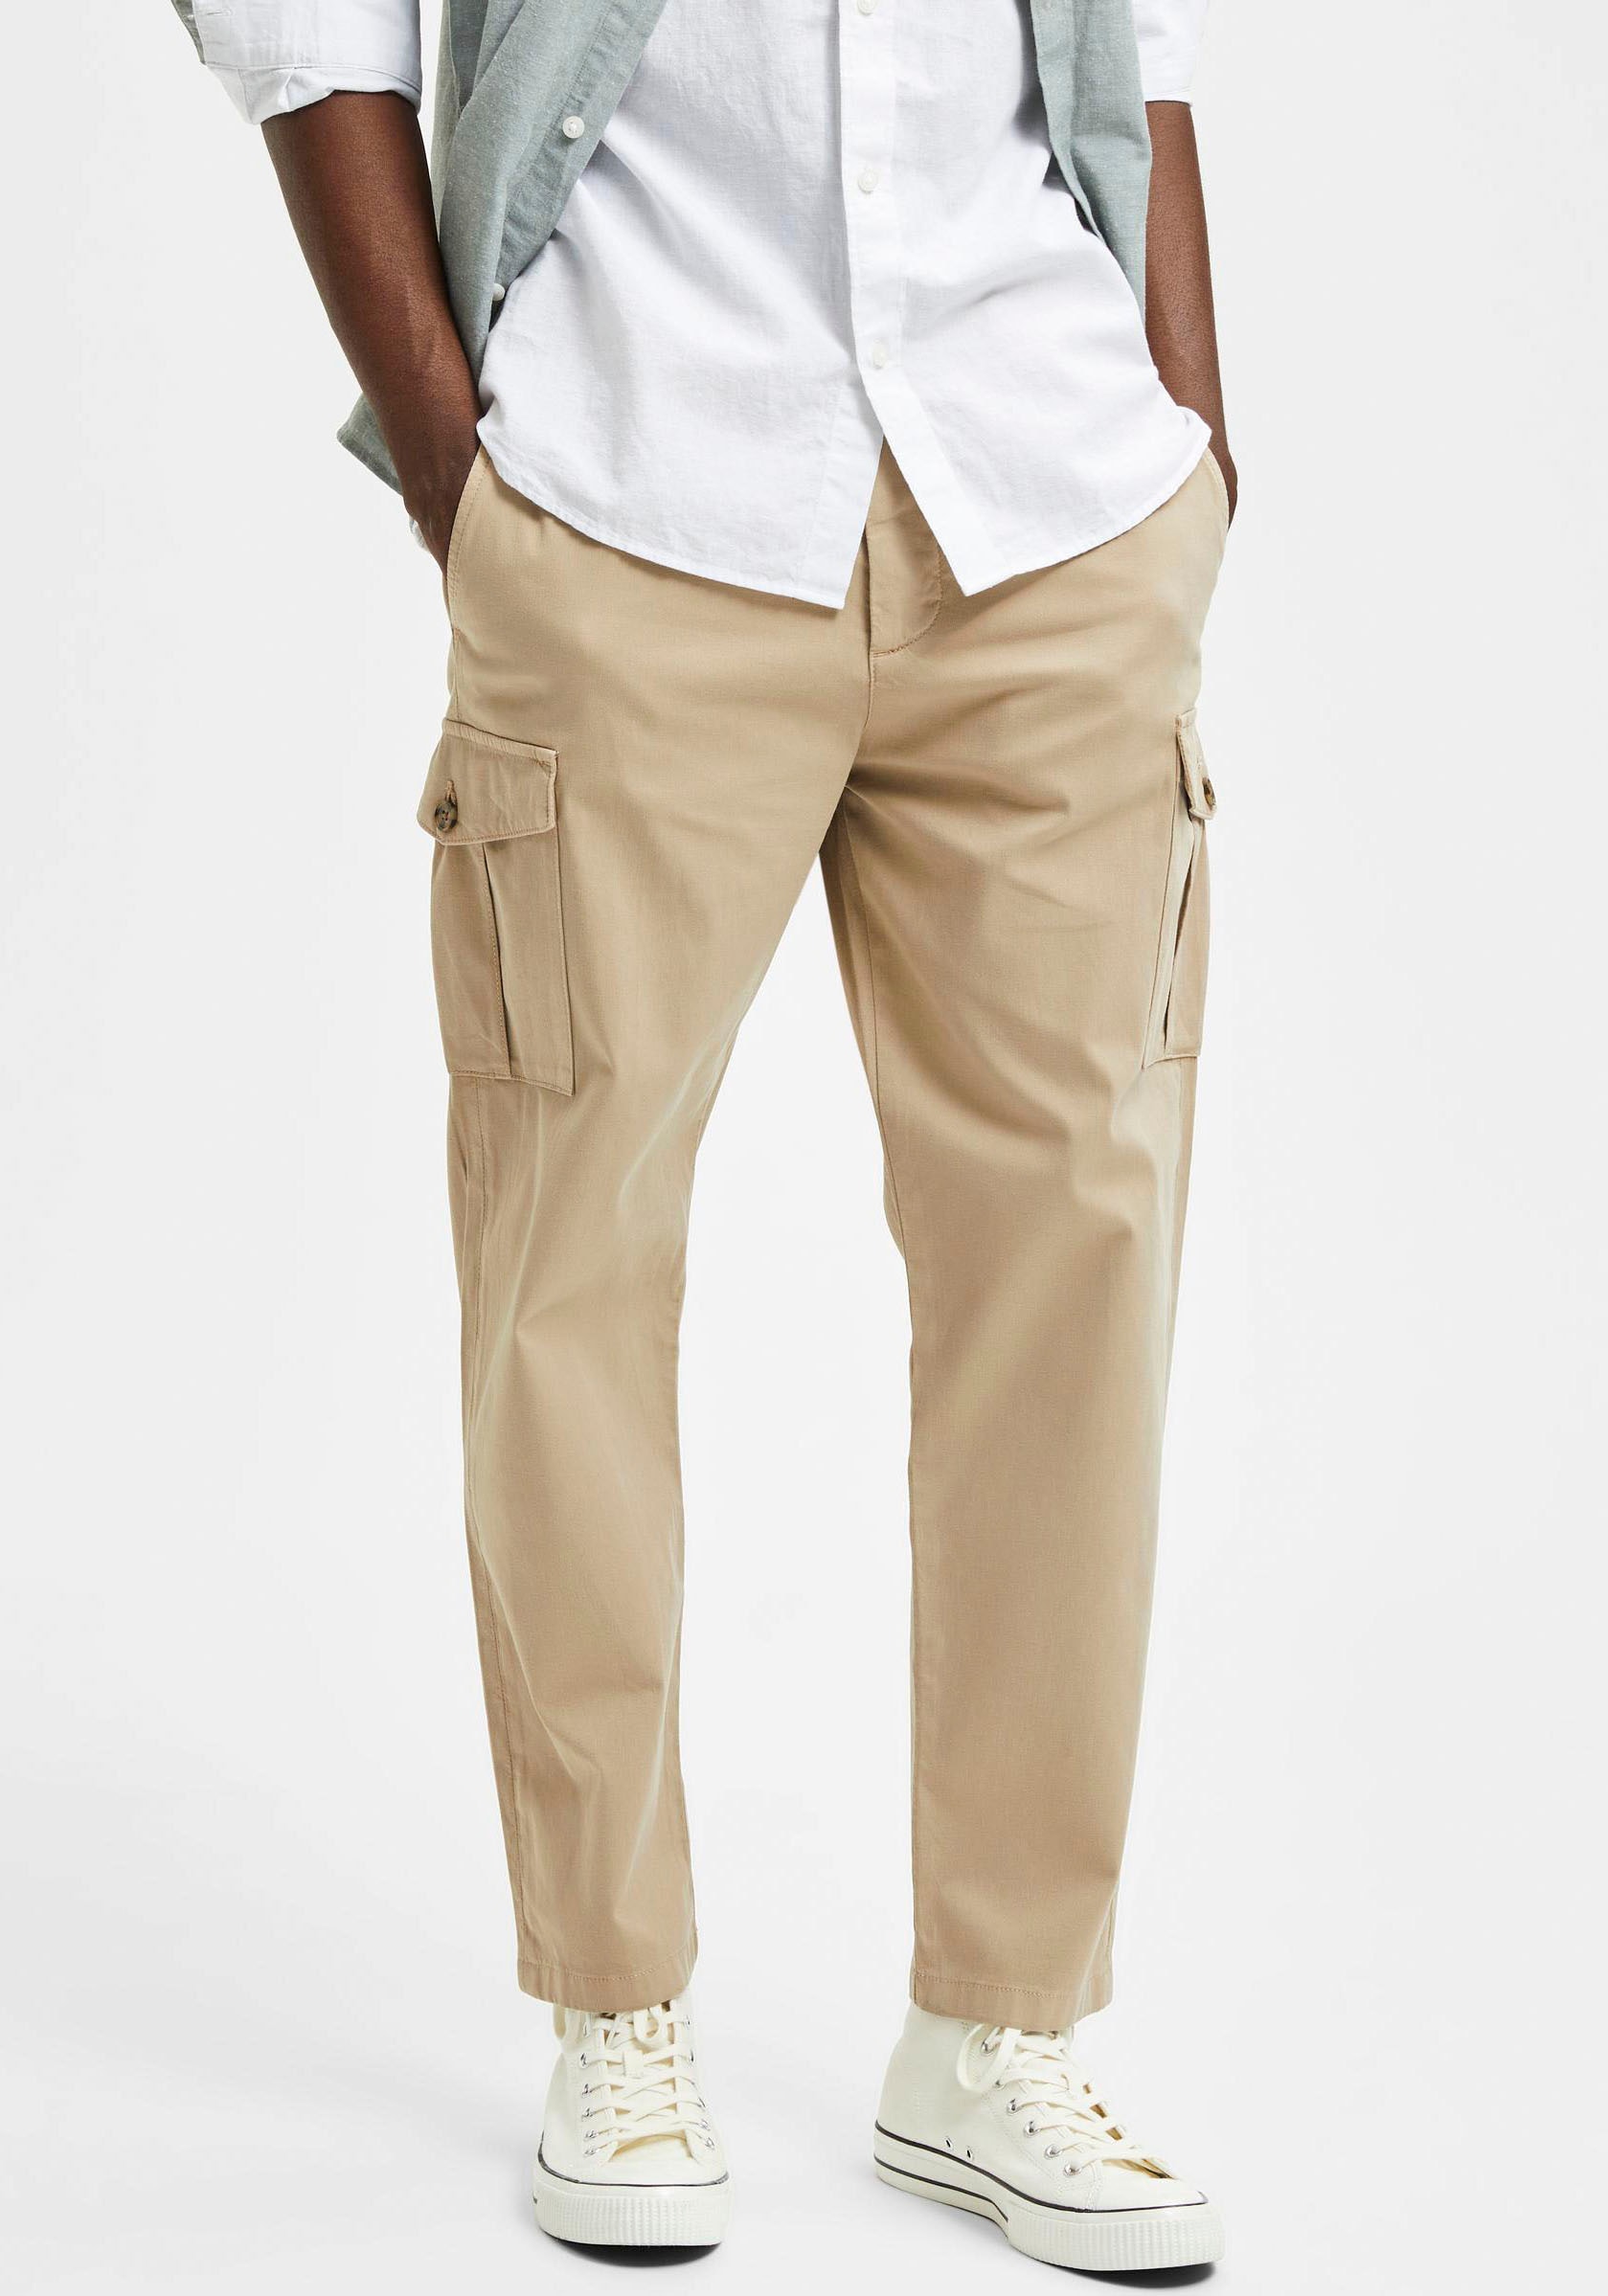 SELECTED HOMME Cargohose »WICK CARGO PANT« online kaufen bei OTTO